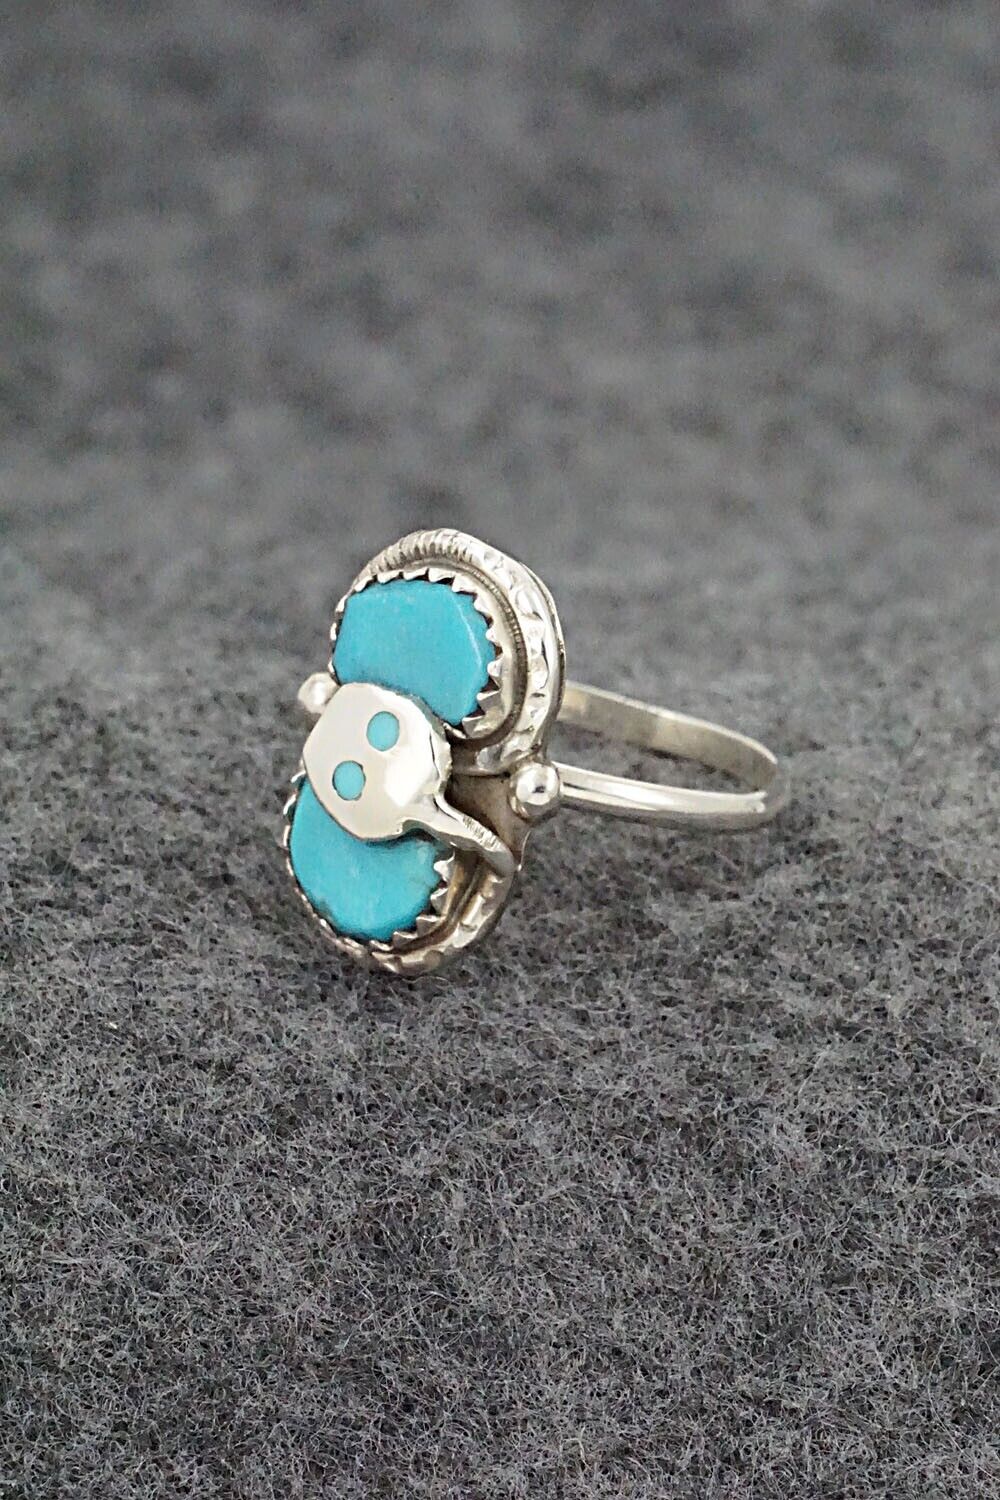 Turquoise & Sterling Silver Ring - Joy Calavaza - Size 6.5